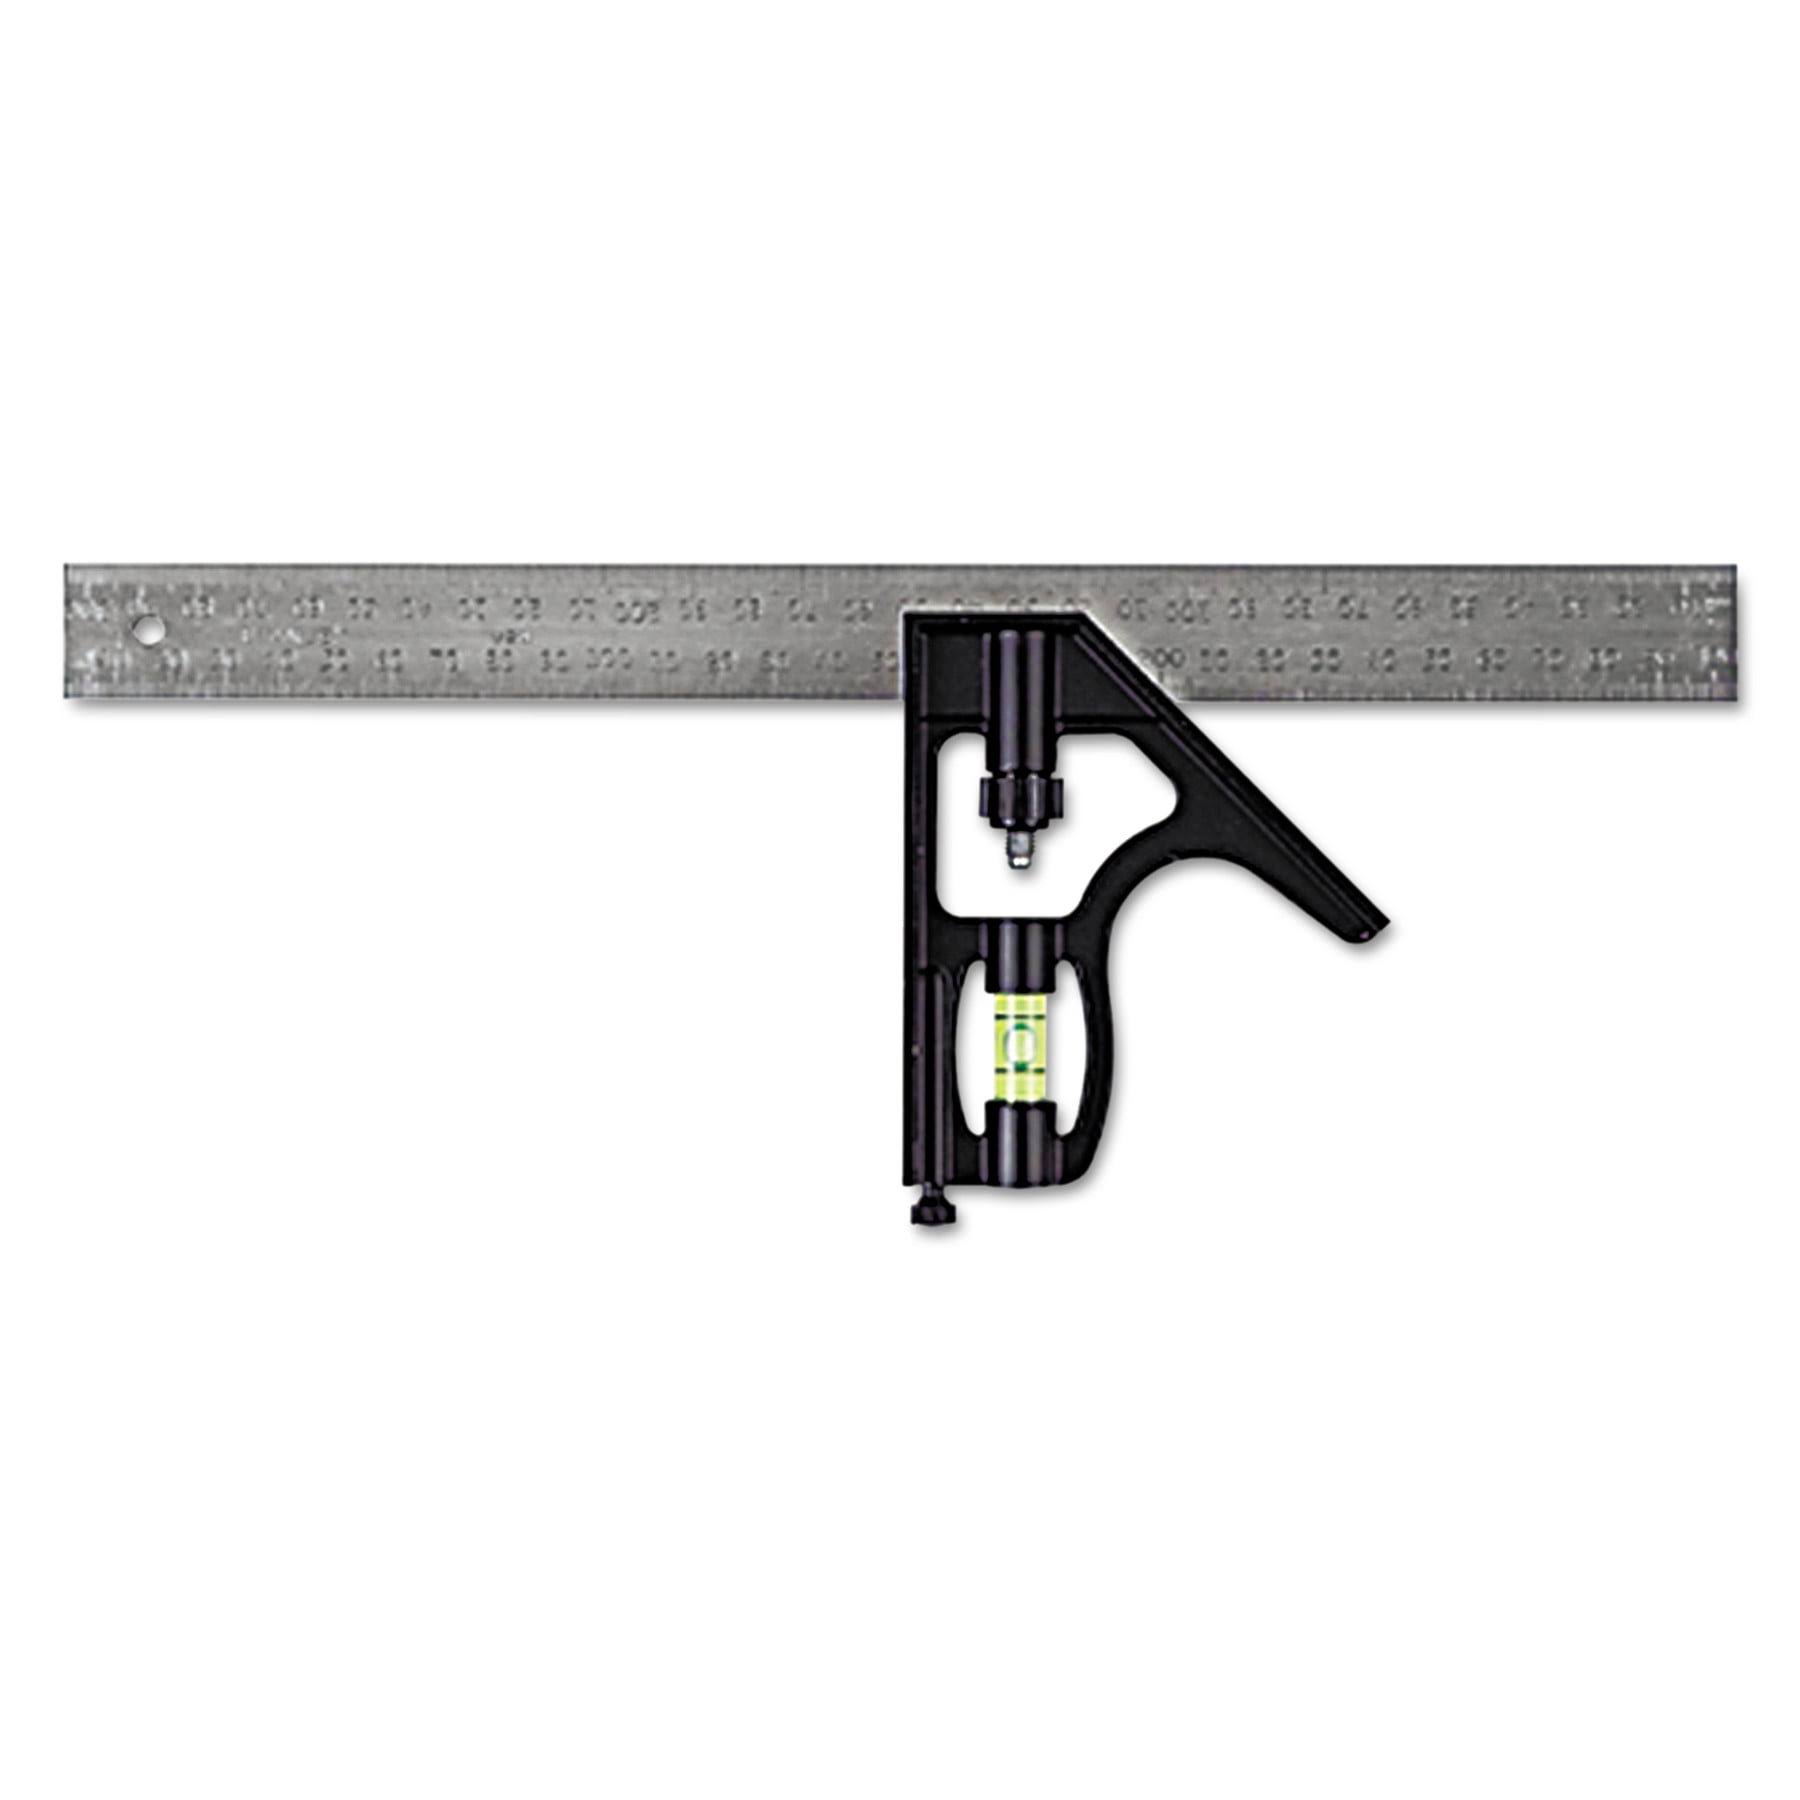 Stanley Tools Combination Square - Steel, Black/Chrome, 12"